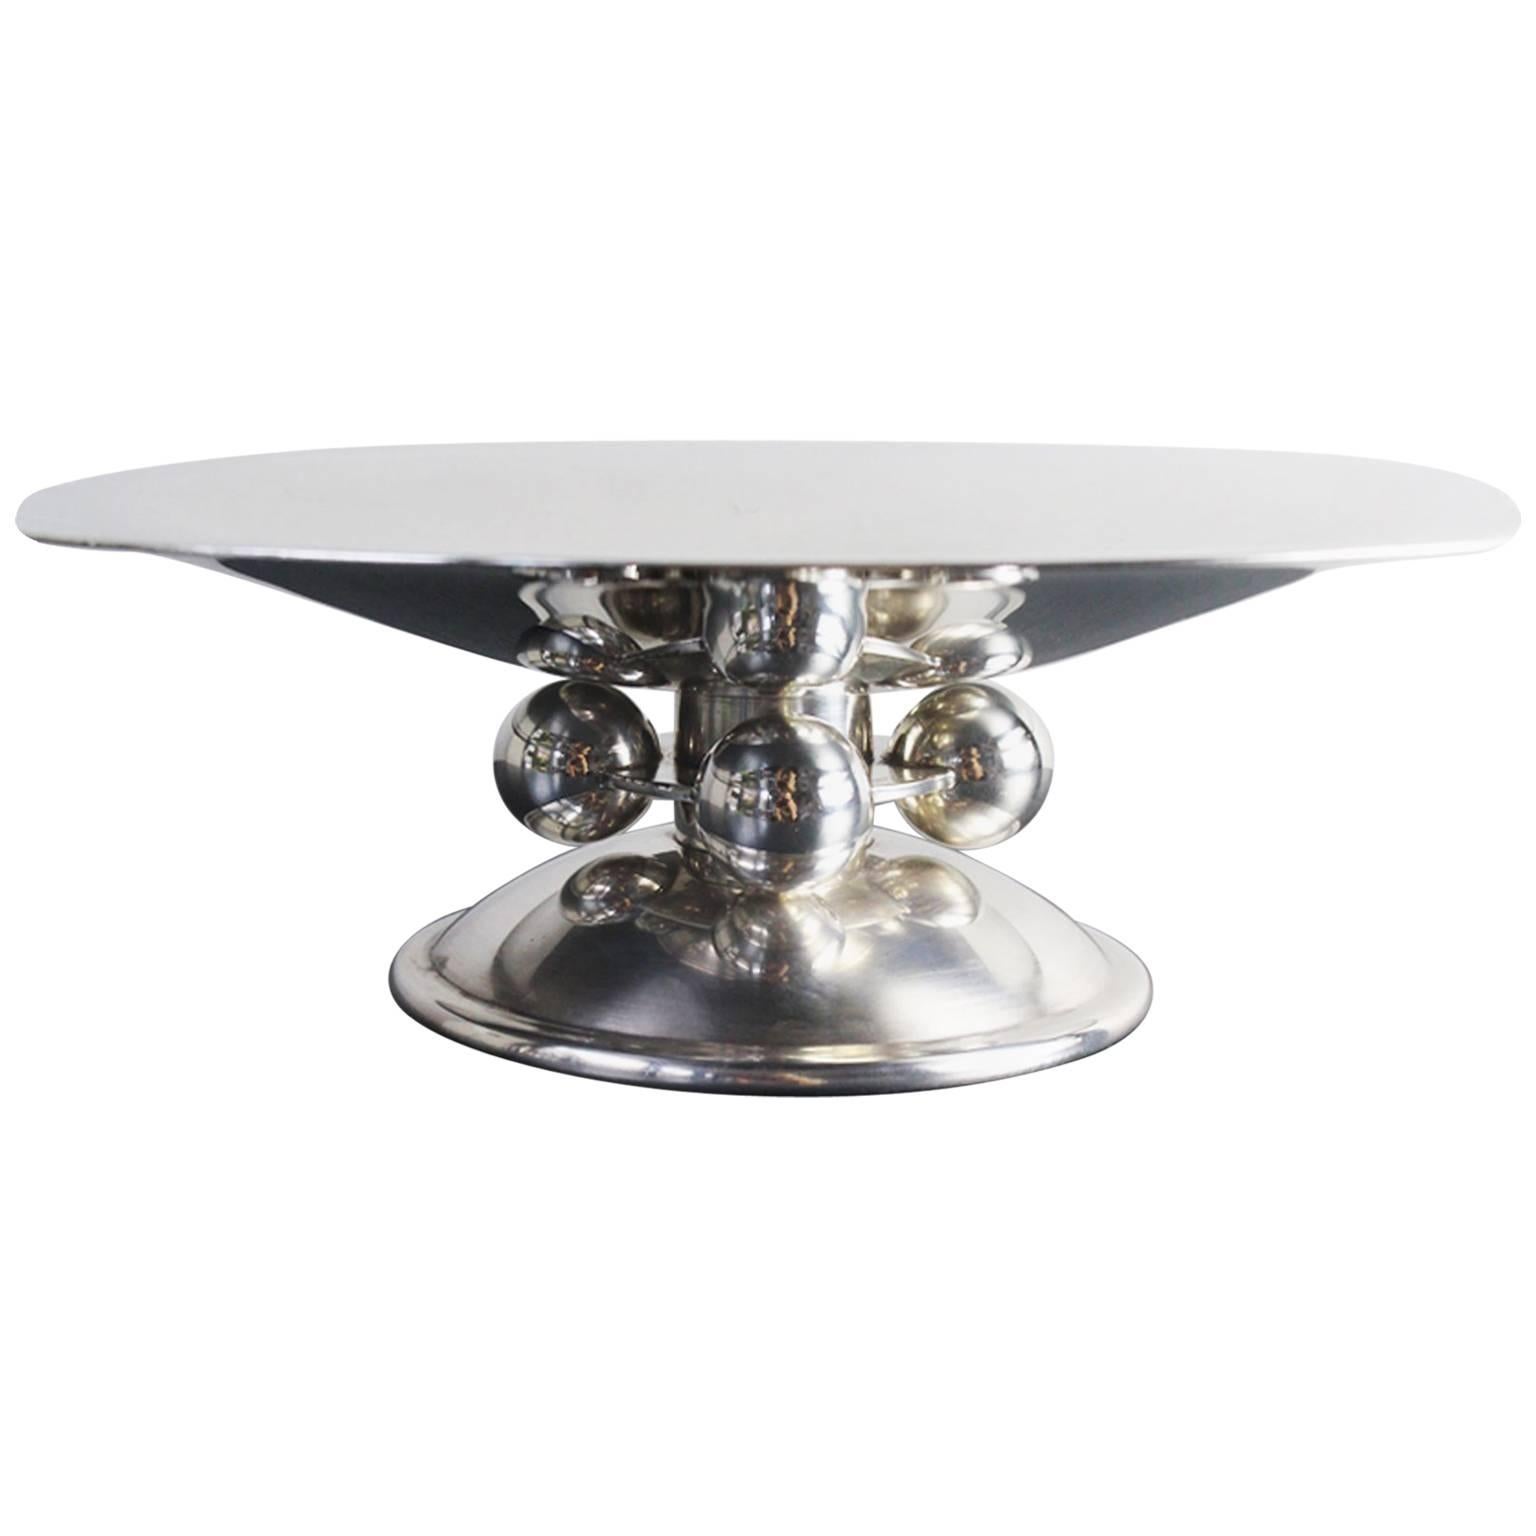 Exceptional Art Deco Silver Plated Centrepiece Dish by Luc Lanel for Christofle For Sale